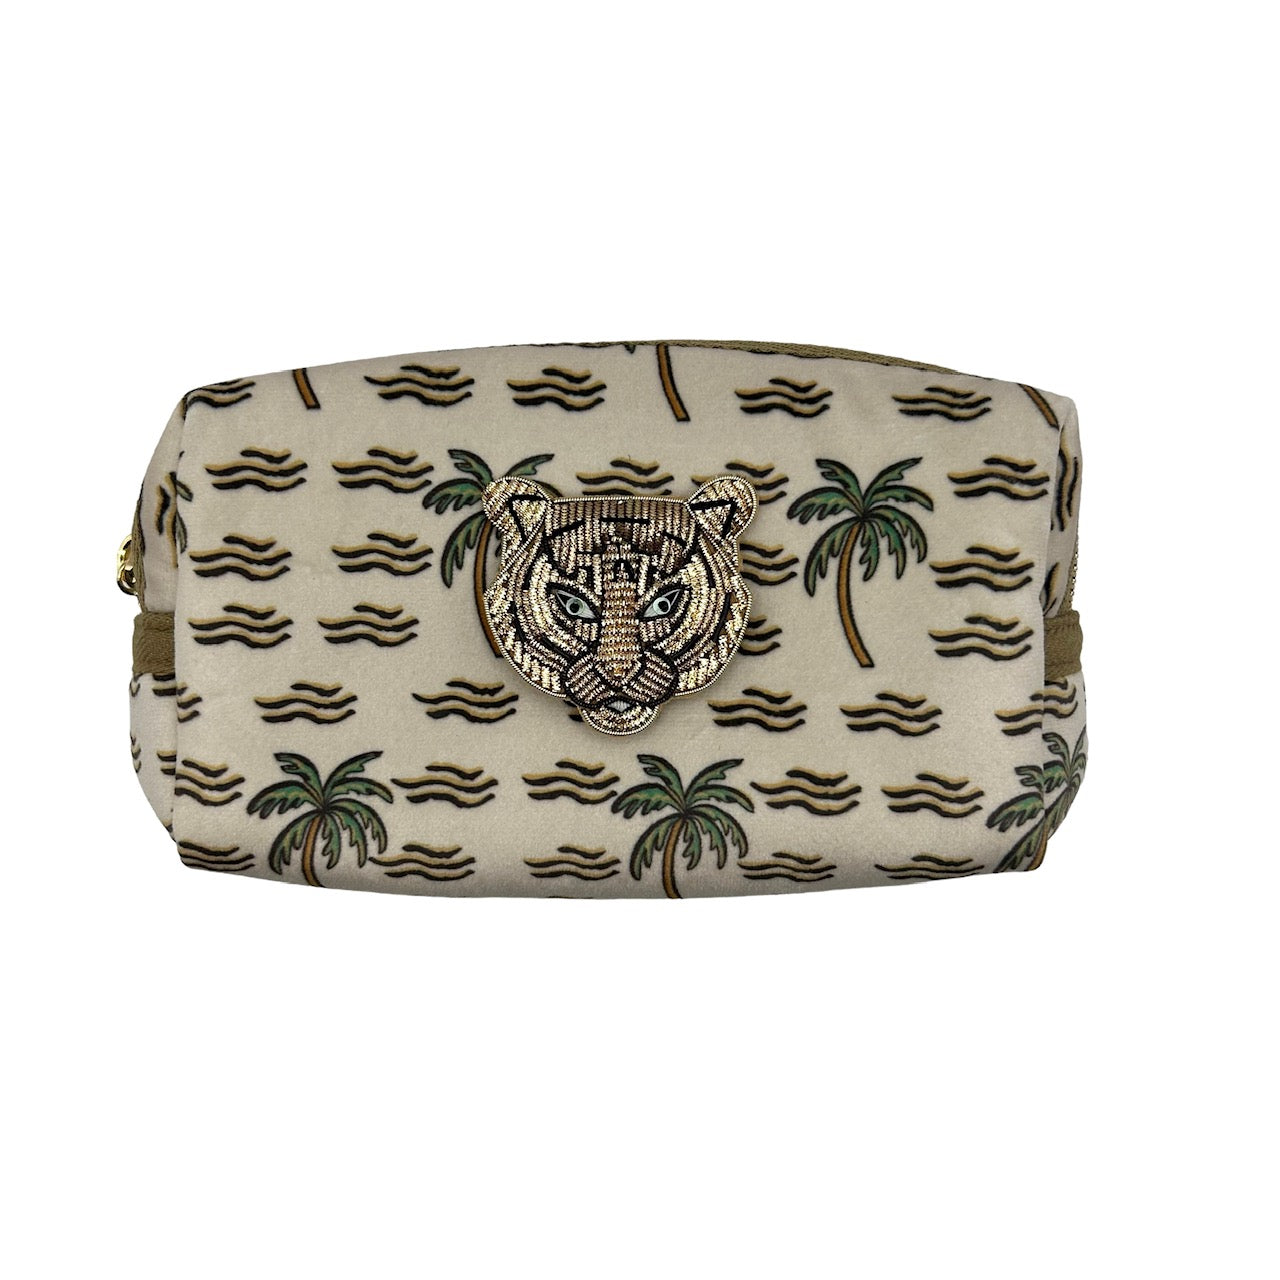 Sand palm large make-up bag & tiger brooch - recycled velvet, large and small